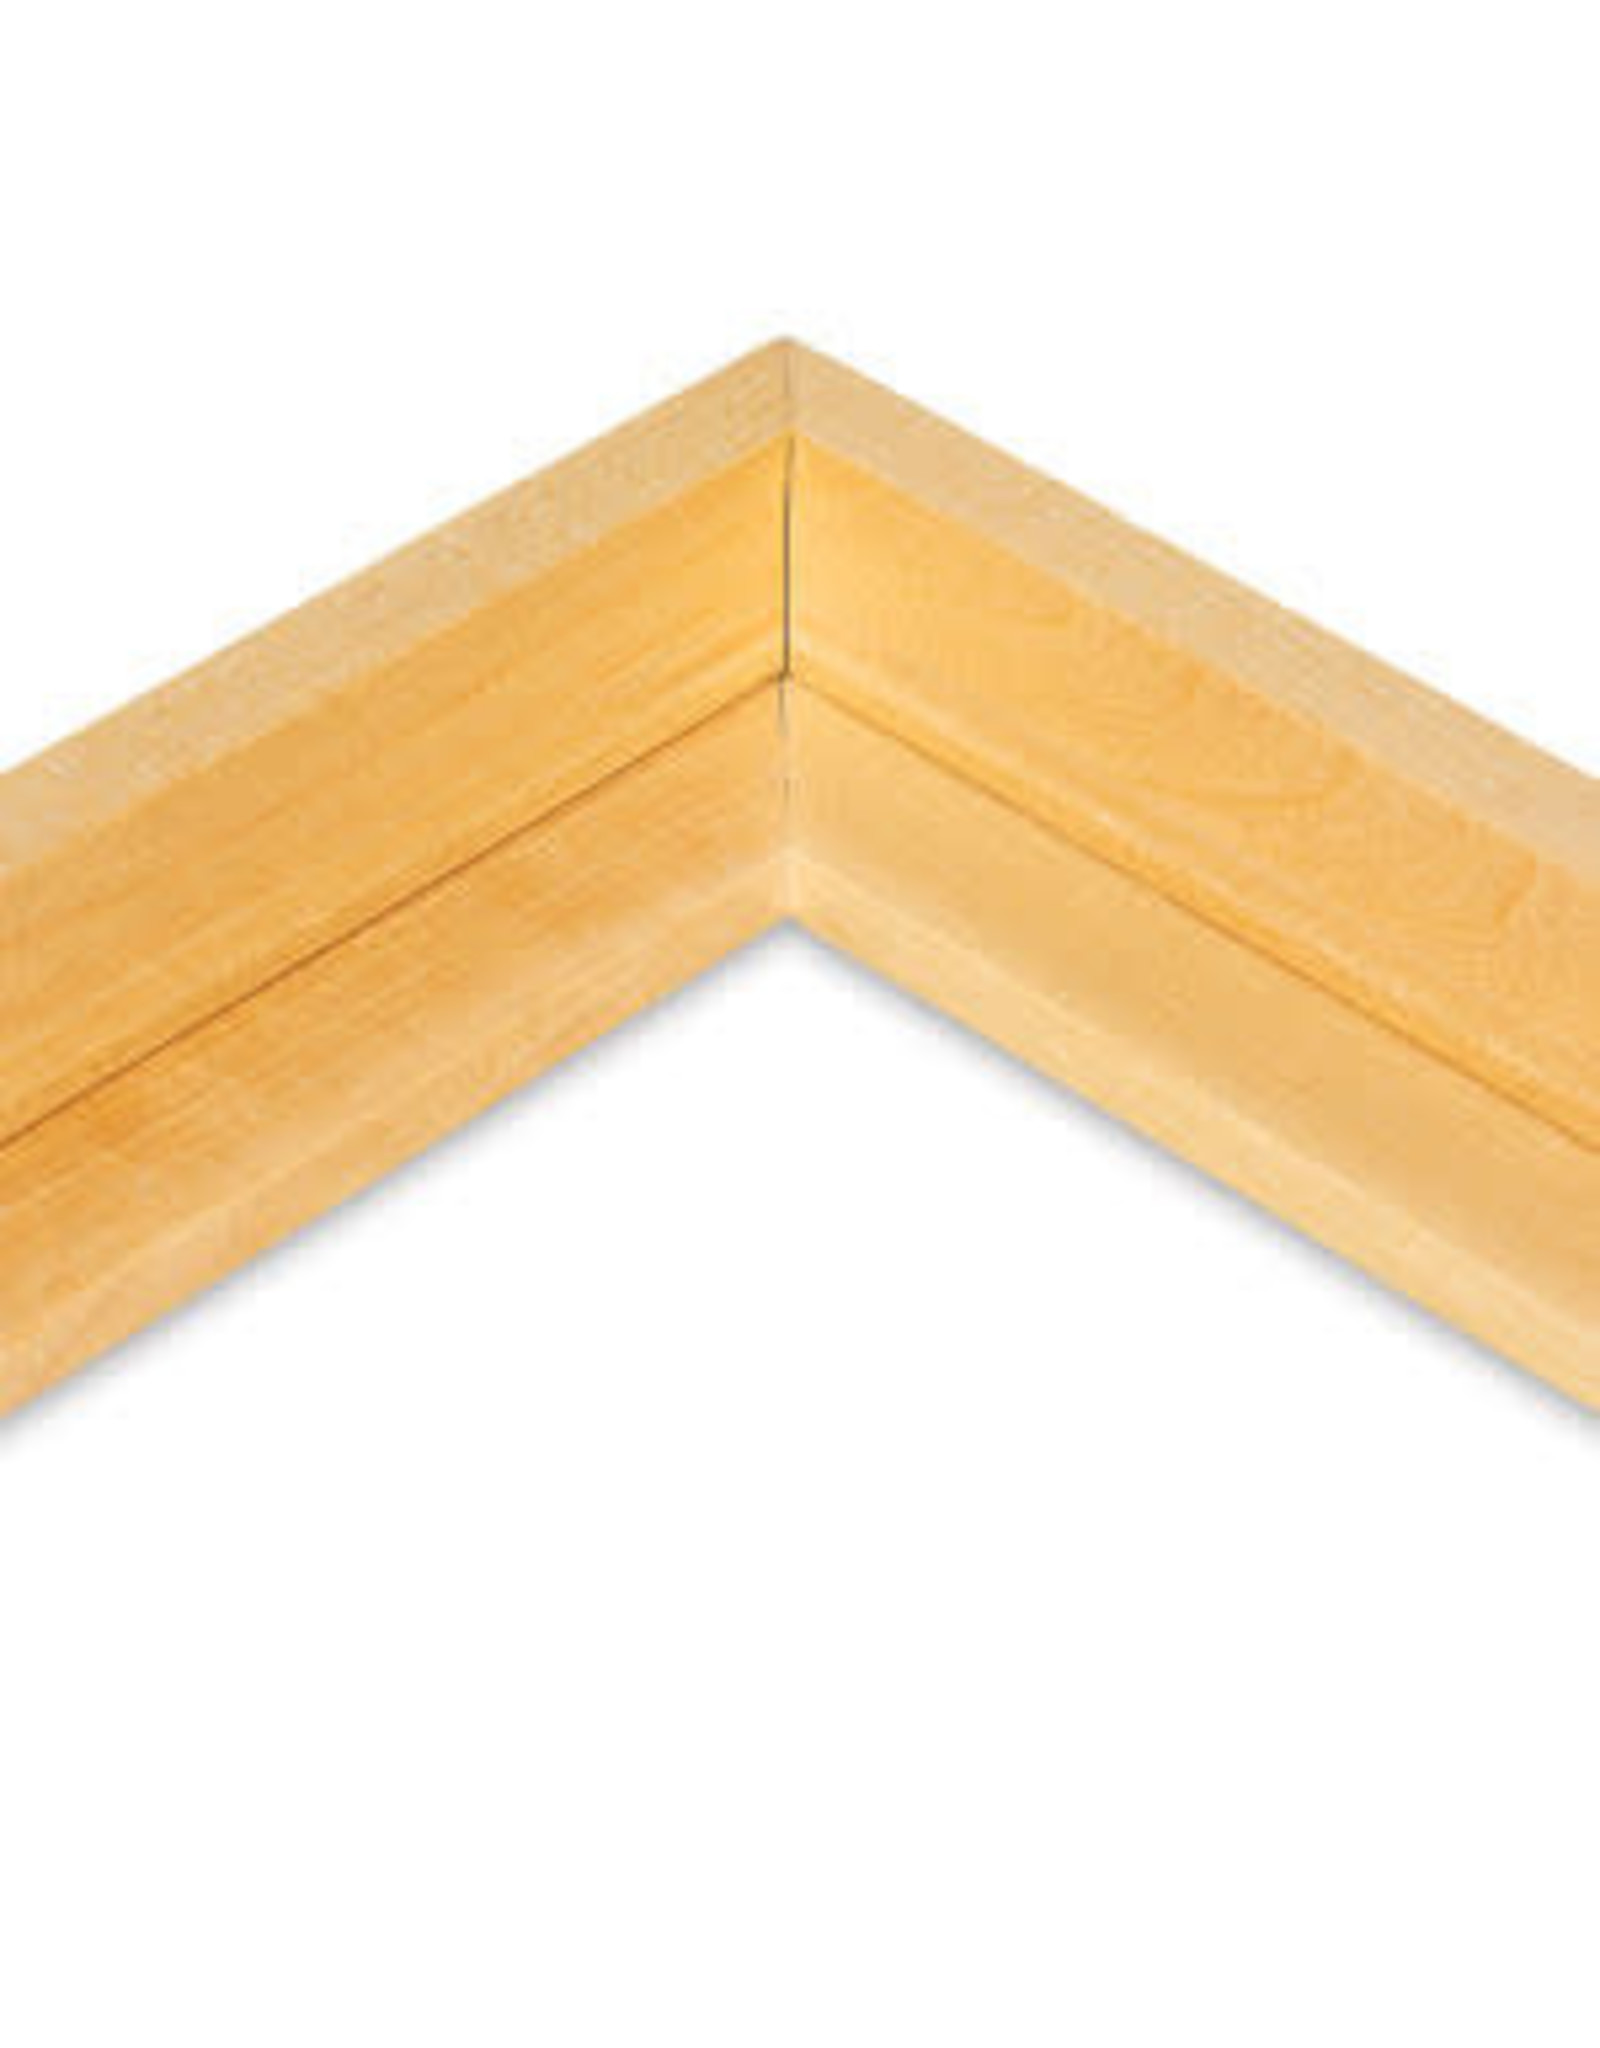 CLEARANCE Floaterframe 1 1/2" Thin Maple 12x12